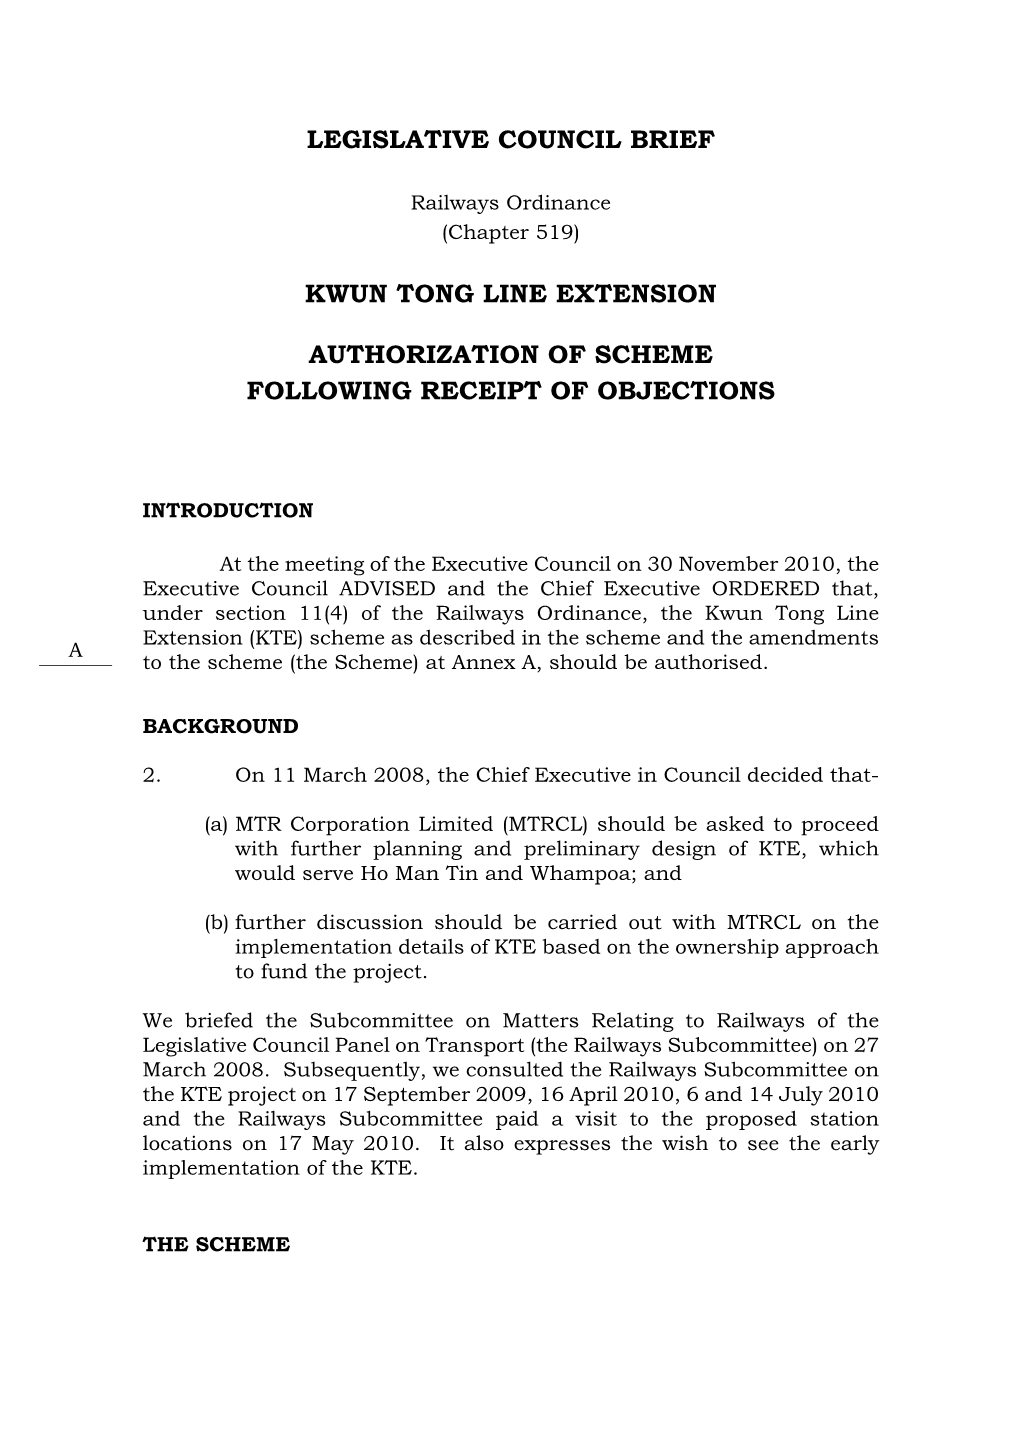 Kwun Tong Line Extension Authorization of Scheme Following Receipt Of